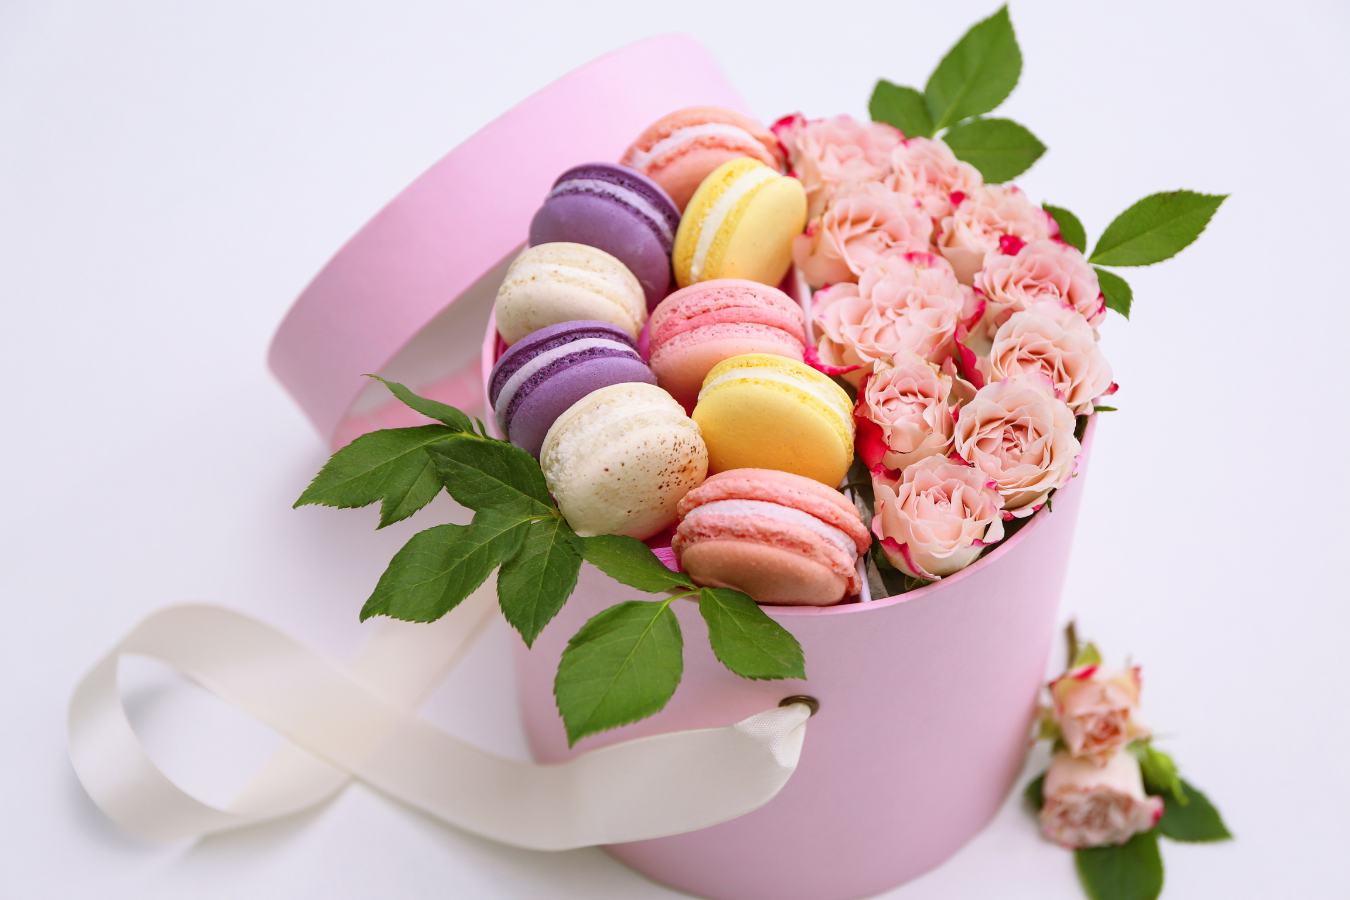 Valentine Gift Ideas for Women & Unexpected Gifts to Surprise Her: Beautifully Packaged Gift Box With Her Favorite Flowers and Preferred Delectable Treats